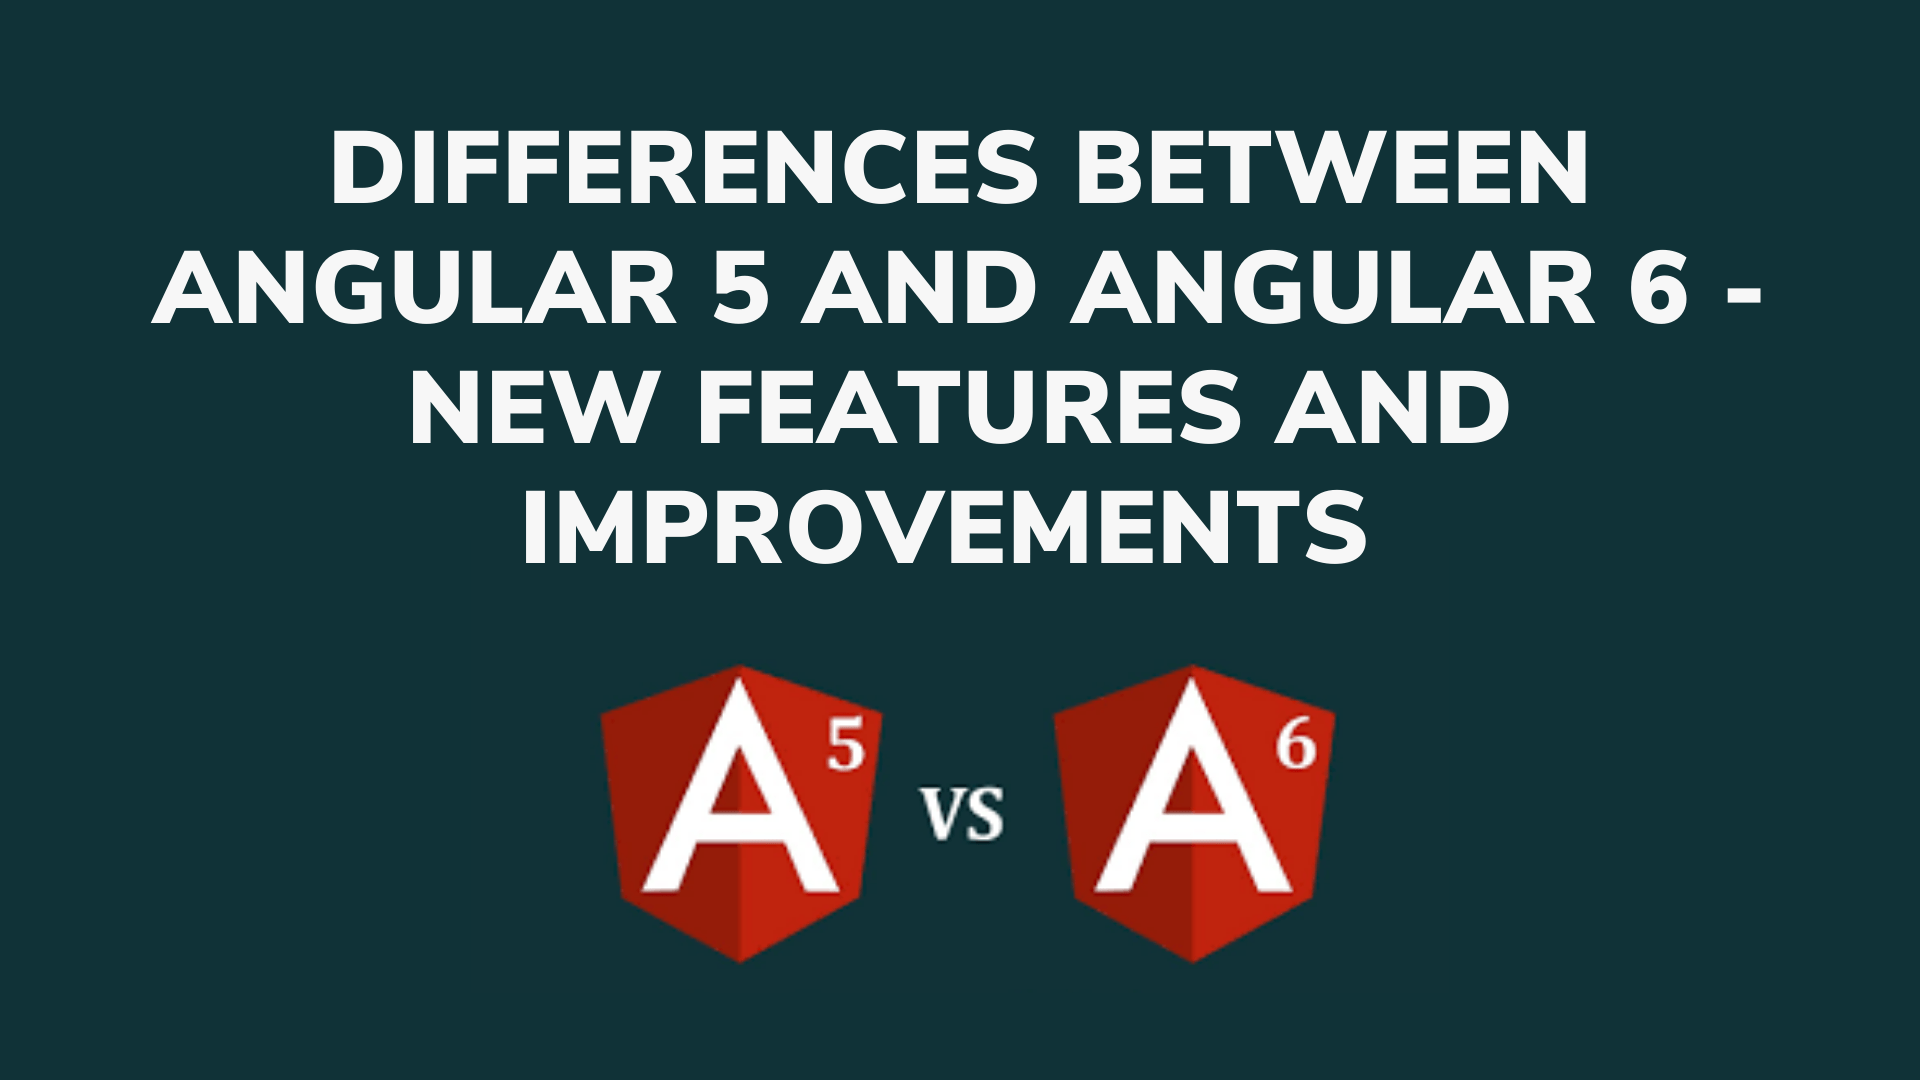 Differences-Between-Angular-5-and-Angular-6-New-Features-and-Improvements-